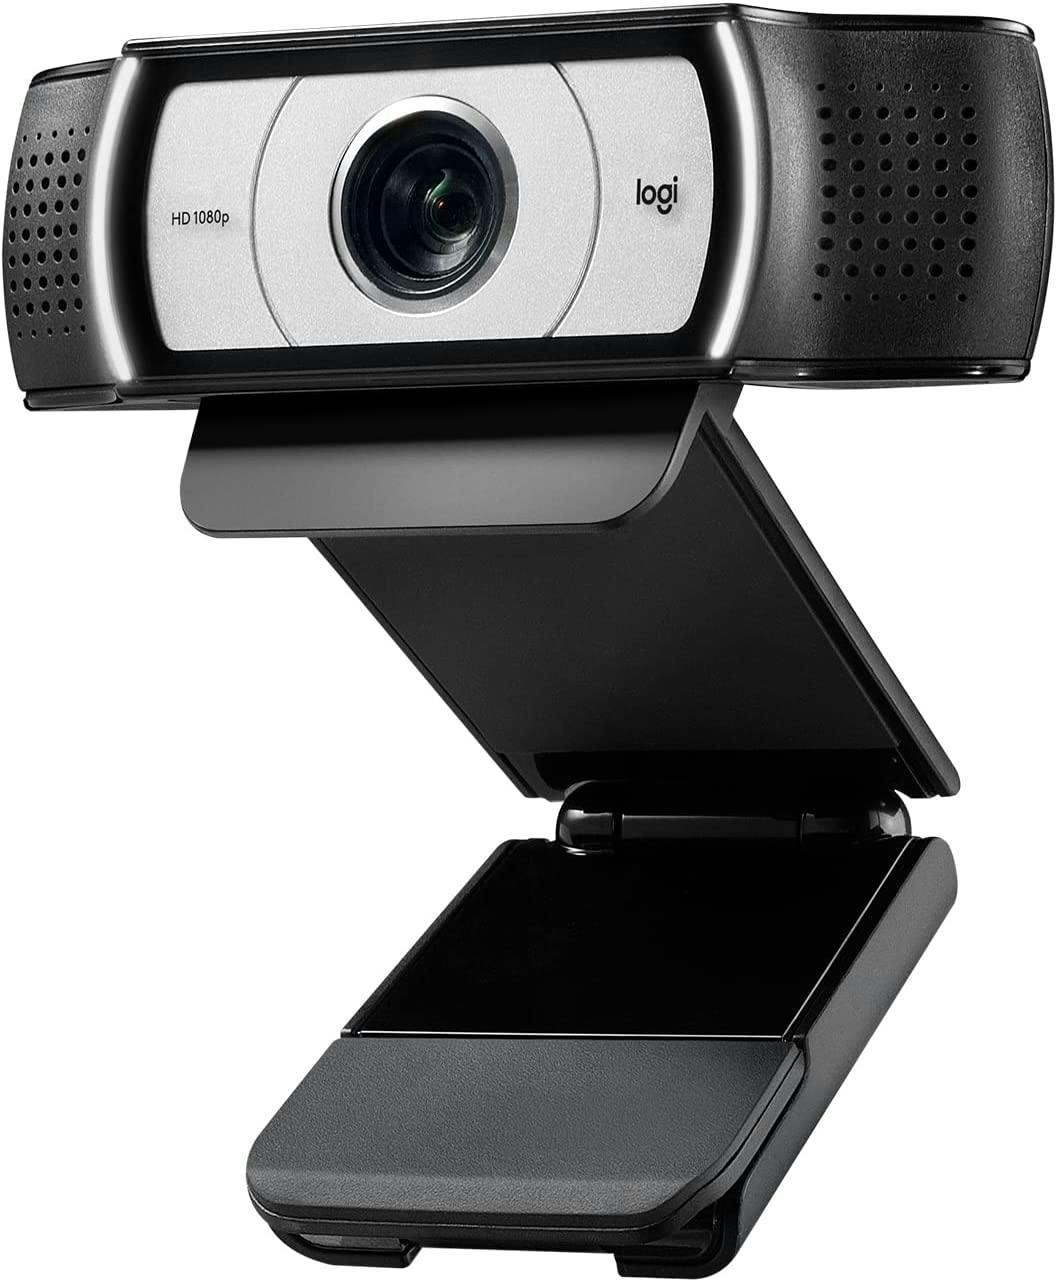 Logitech C390 is a great budget webcam for YouTube recording